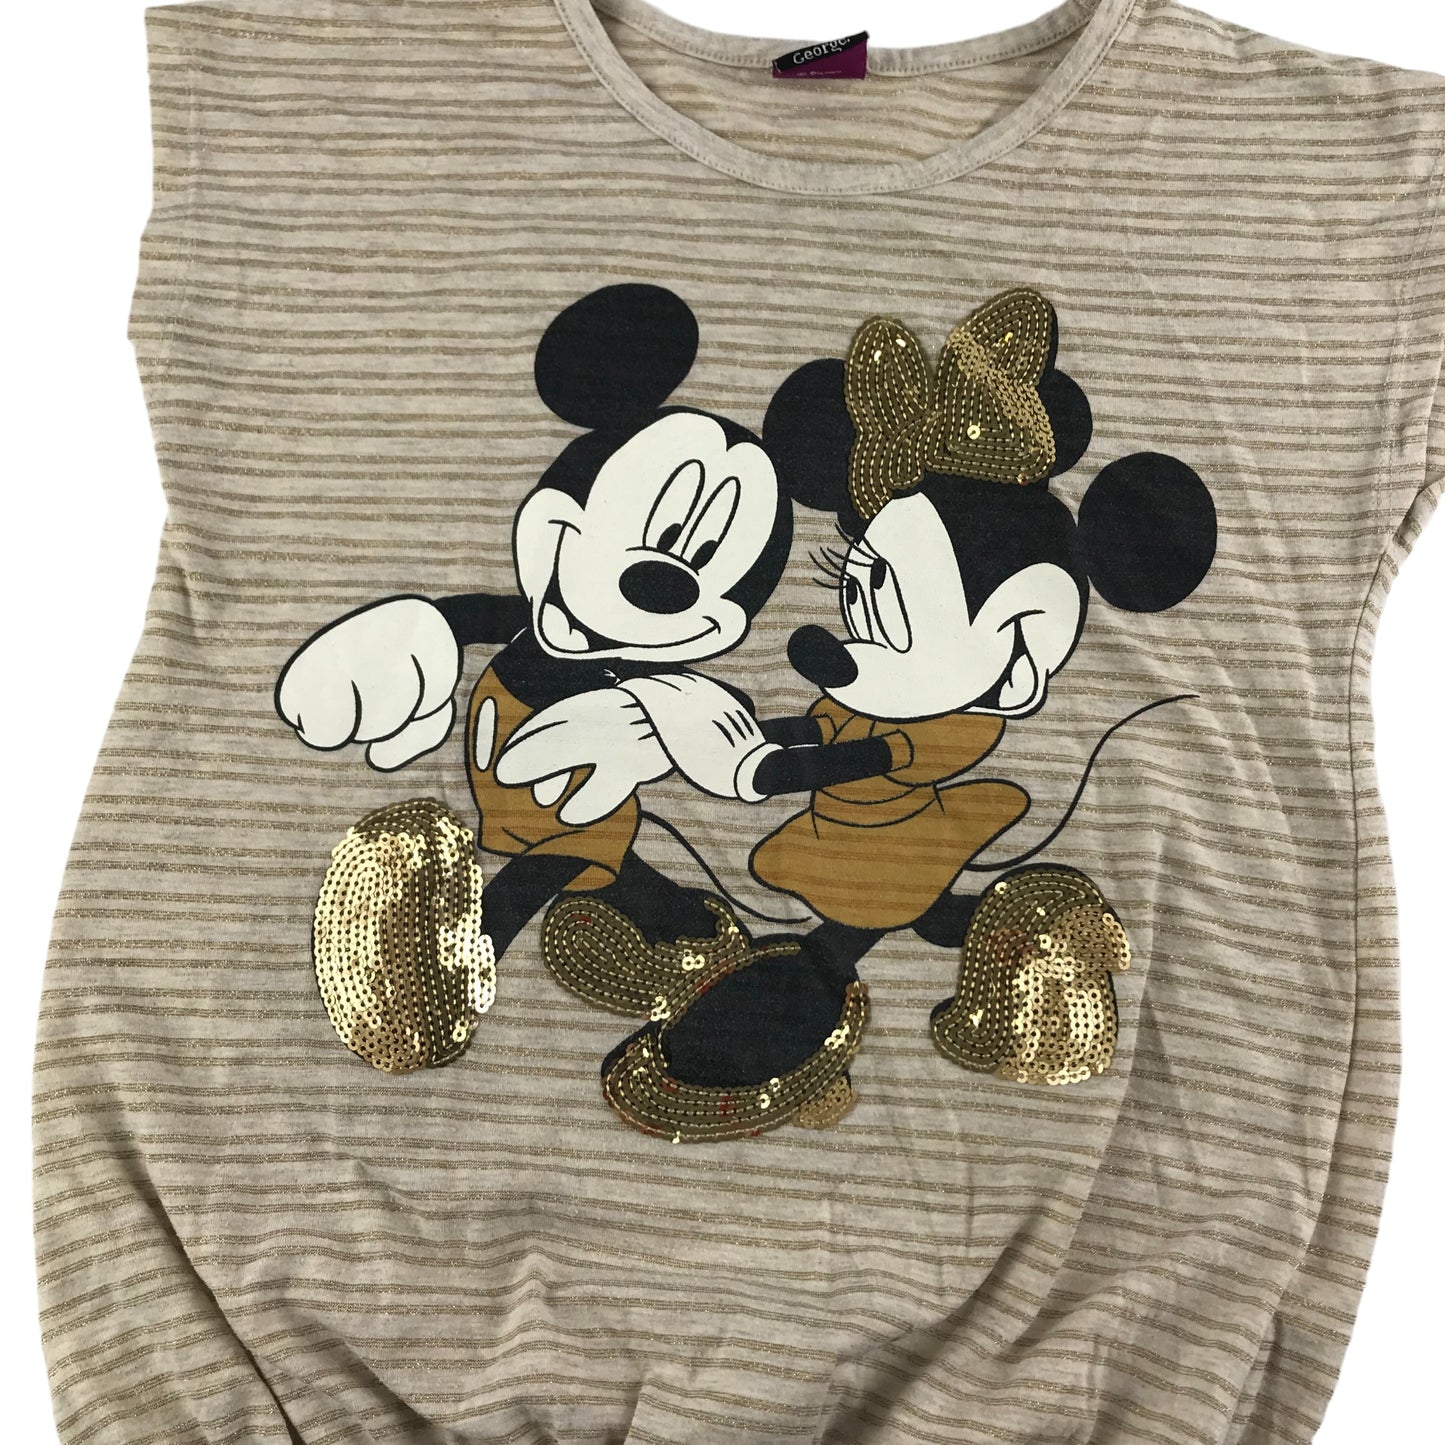 George T-Shirt Age 8 Gold and Beige Short Sleeve Glittery Mickey and Minnie Mouse